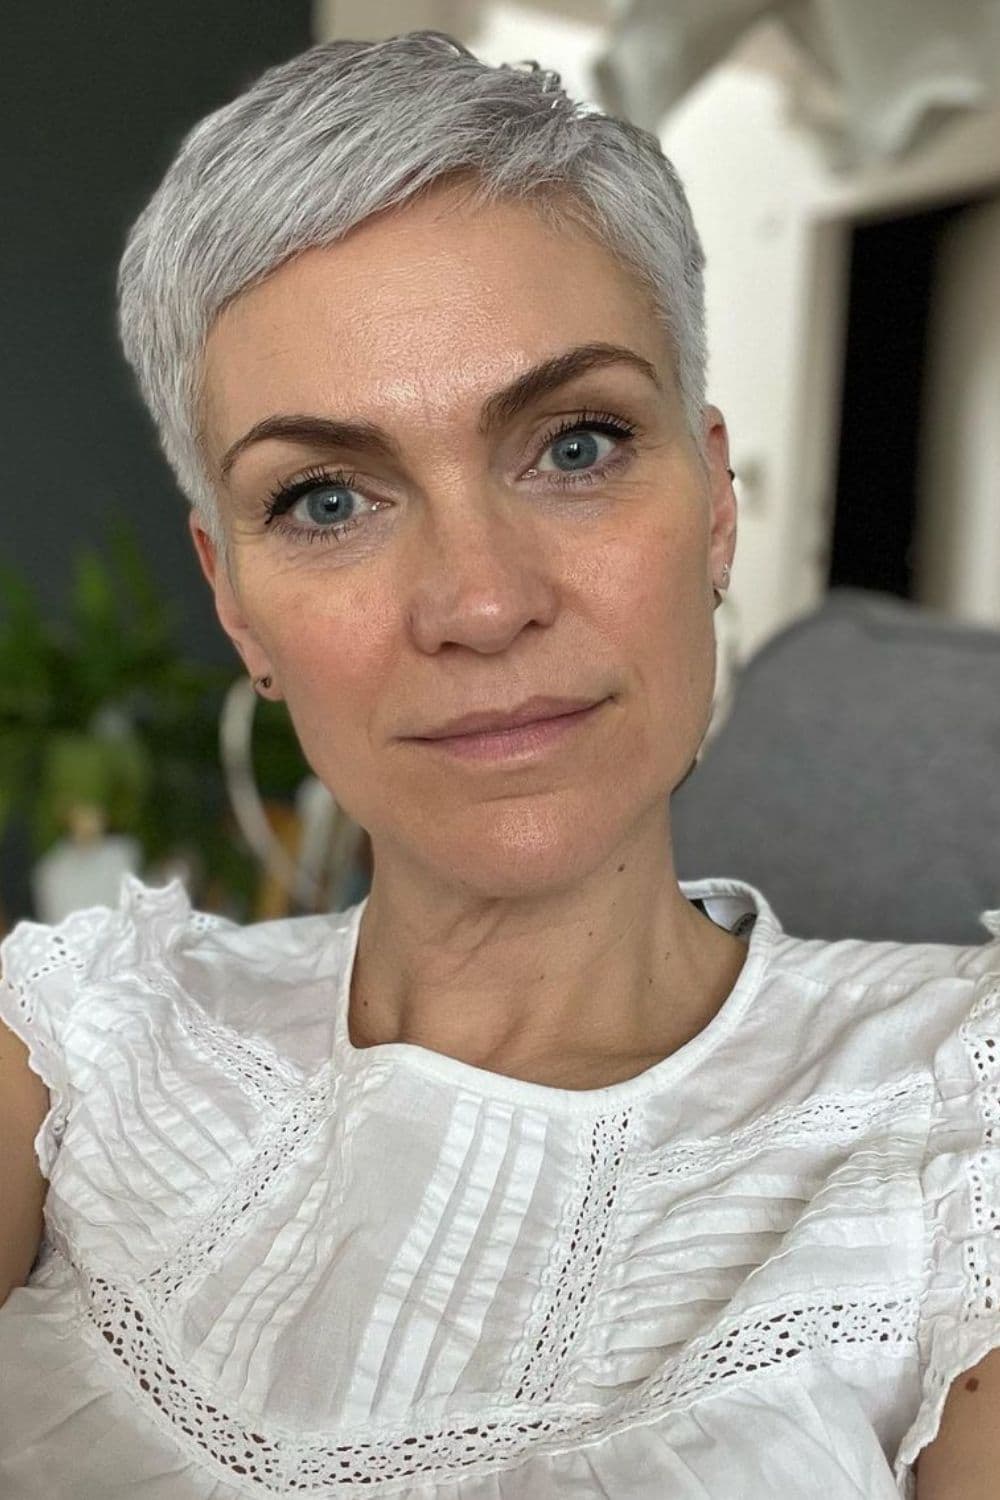 A woman with a silver pixie cut.